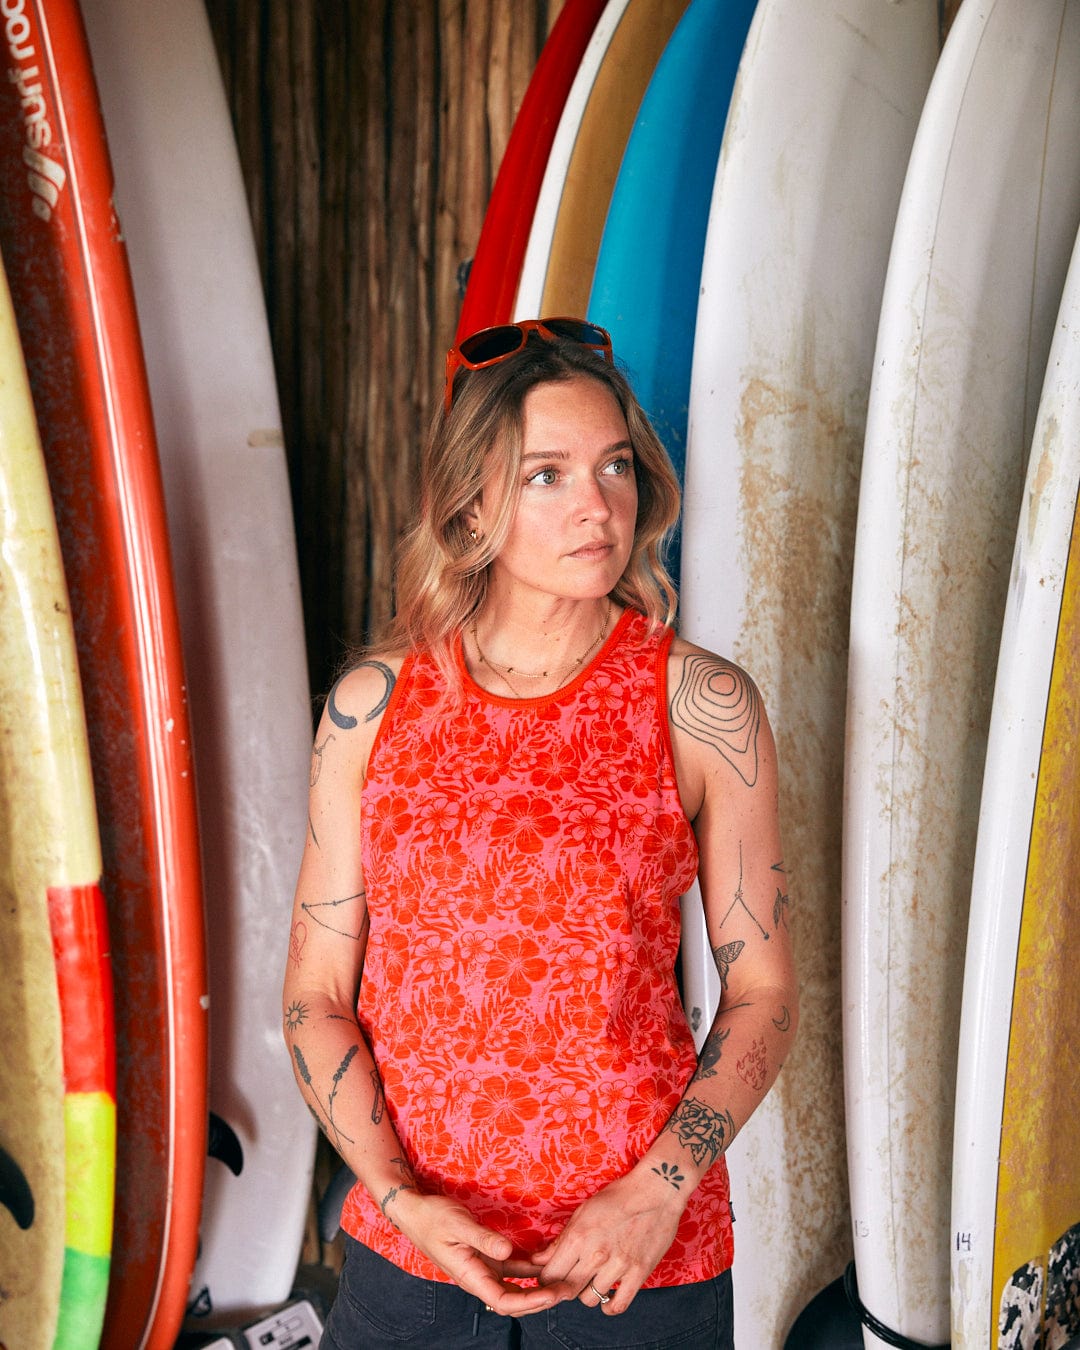 A woman with tattoos, donning a Saltrock Hibiscus - Womens Vest - Red and sunglasses on her head, stands in front of a row of surfboards.